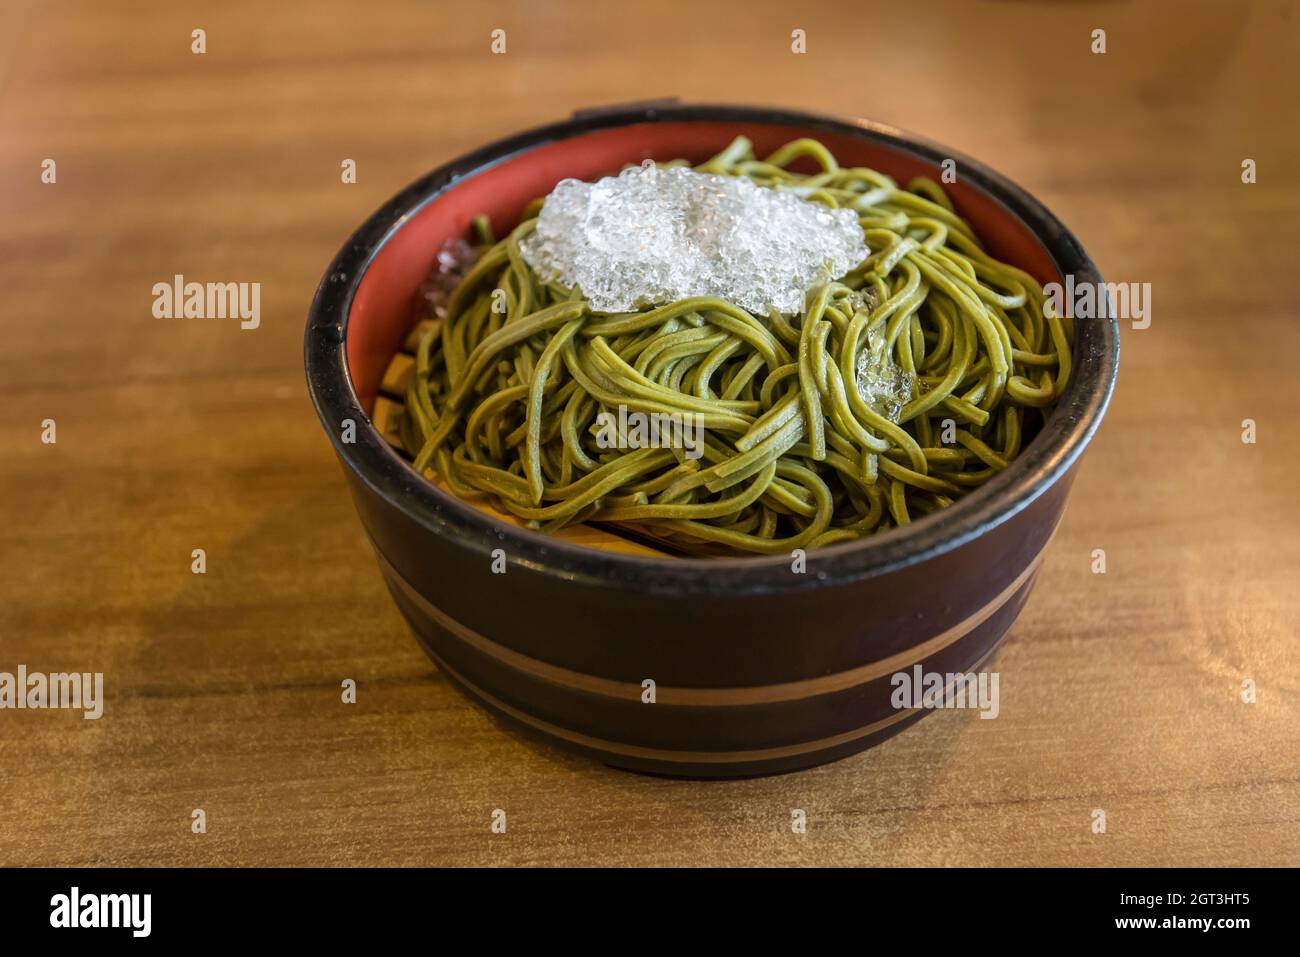 High Angle View Of Cold Soba In Bowl On Table Stock Photo